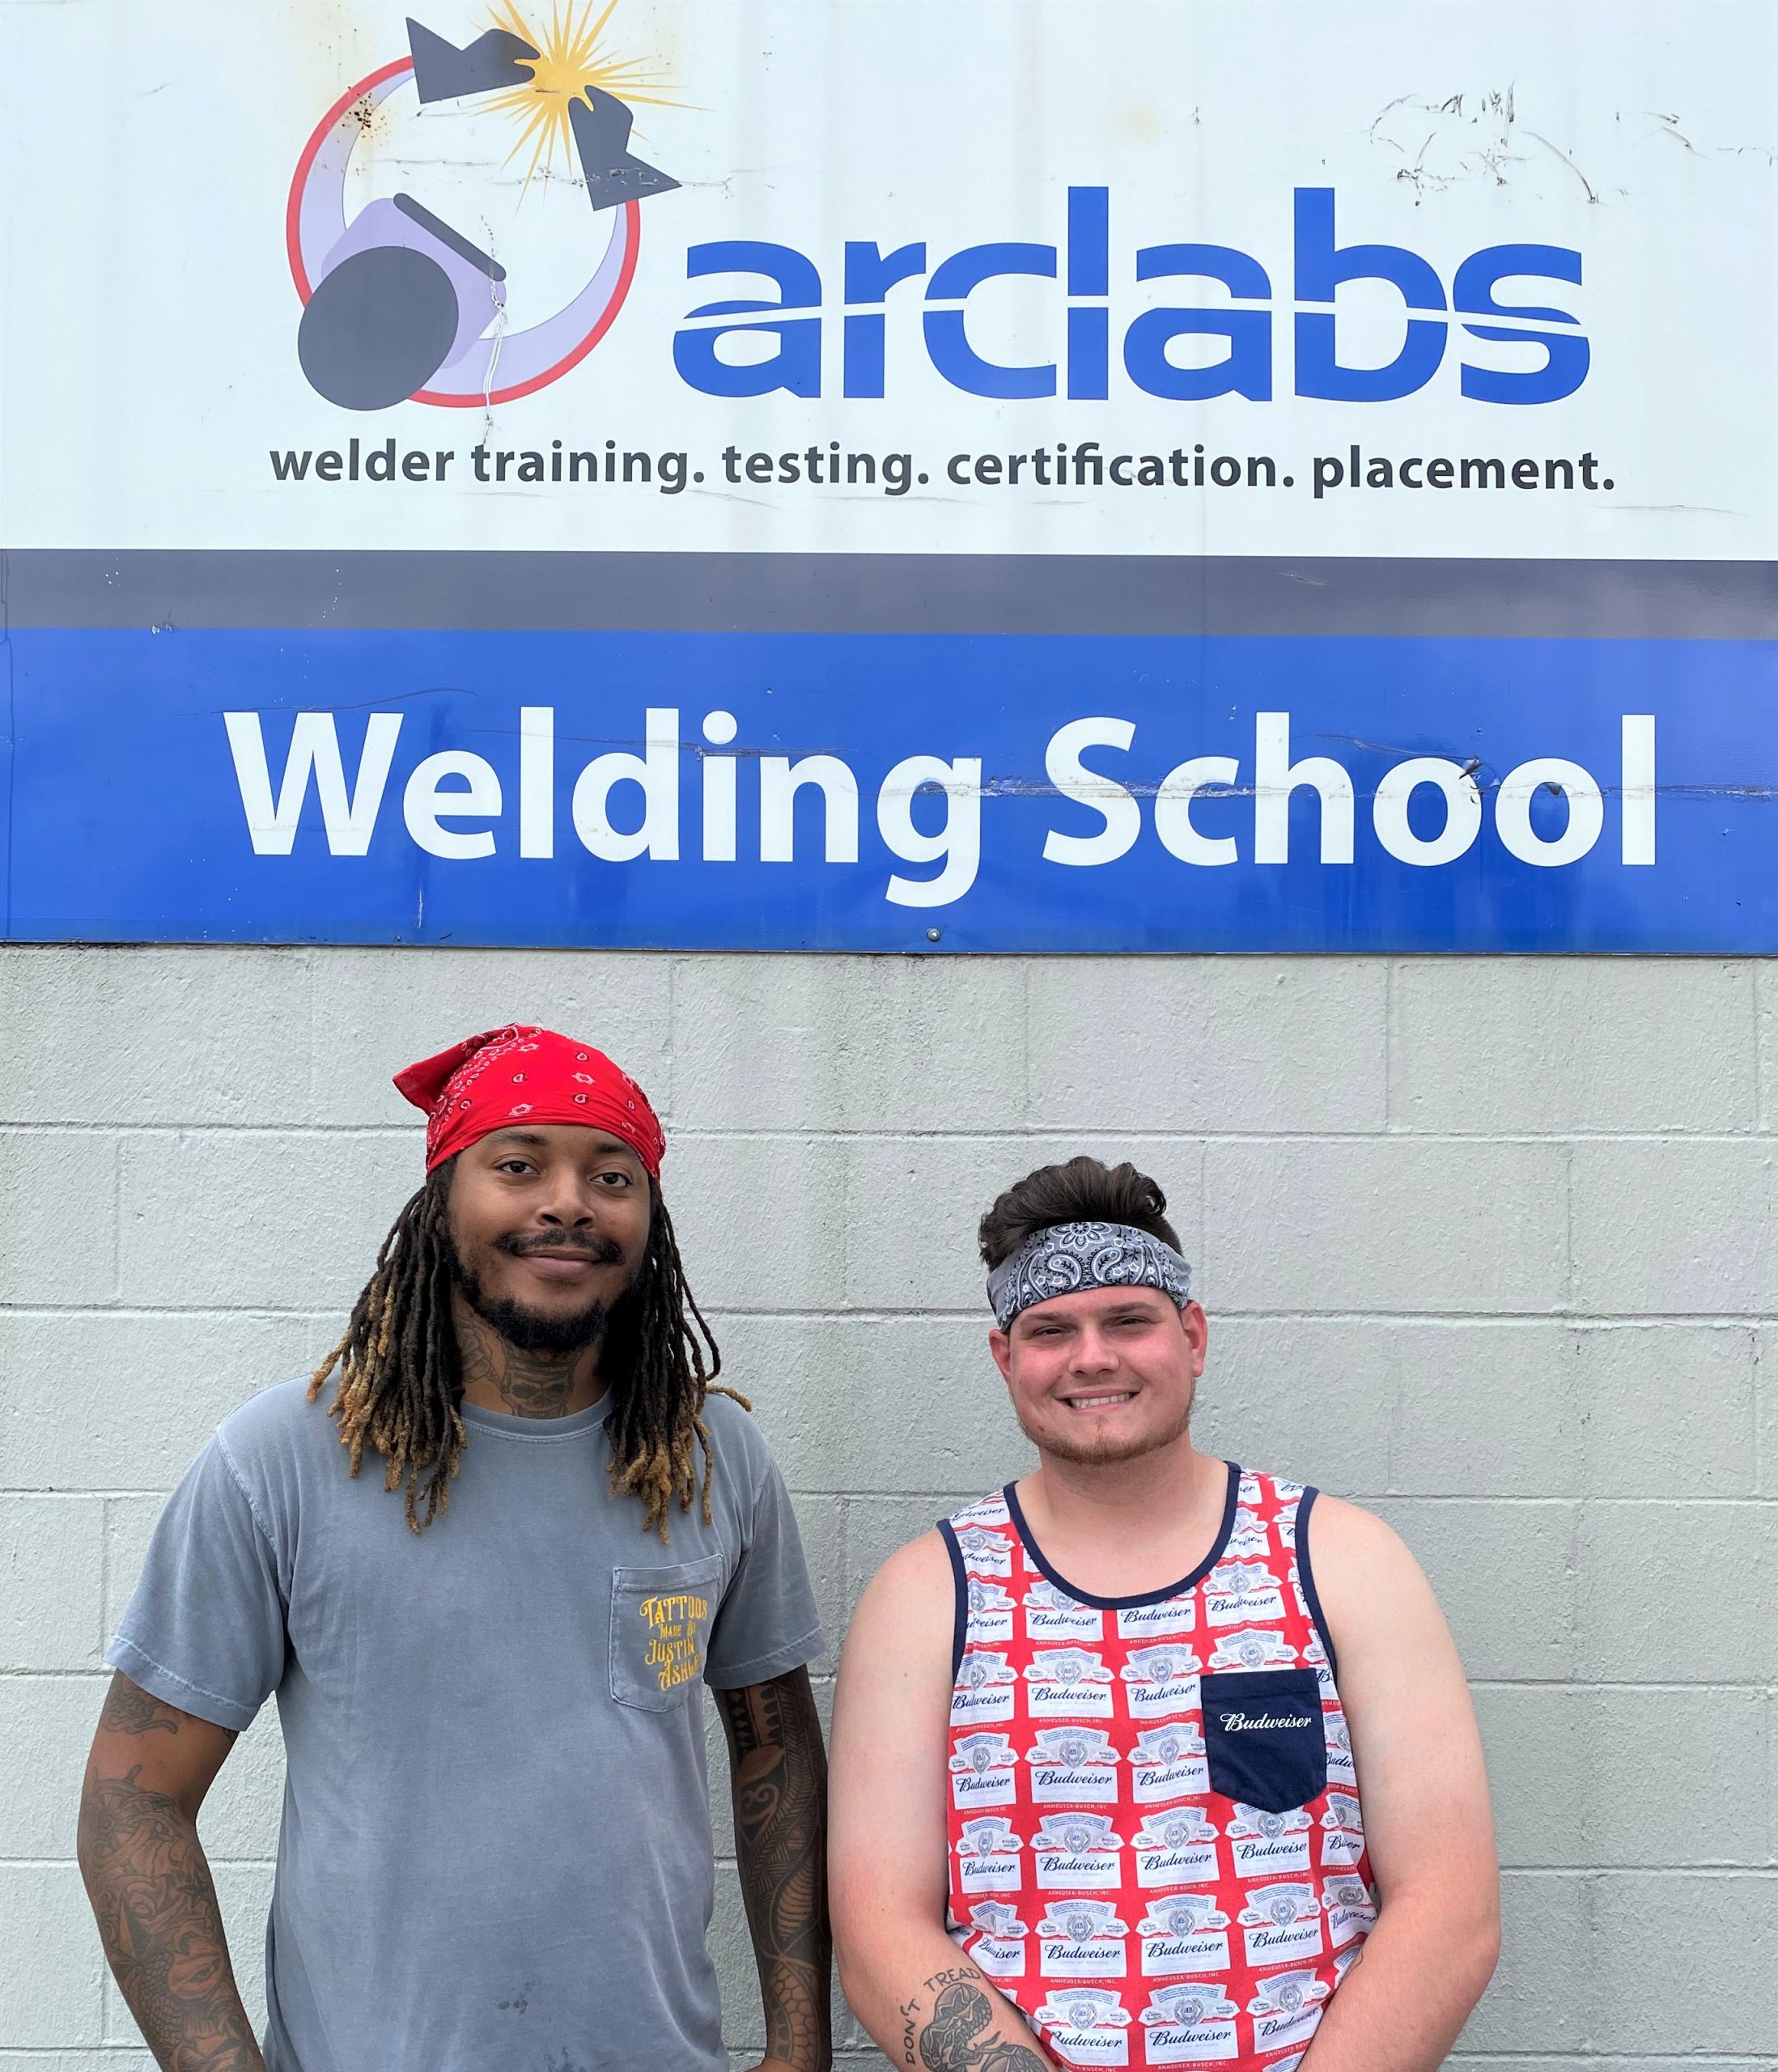 Arclabs welder training testing and certification